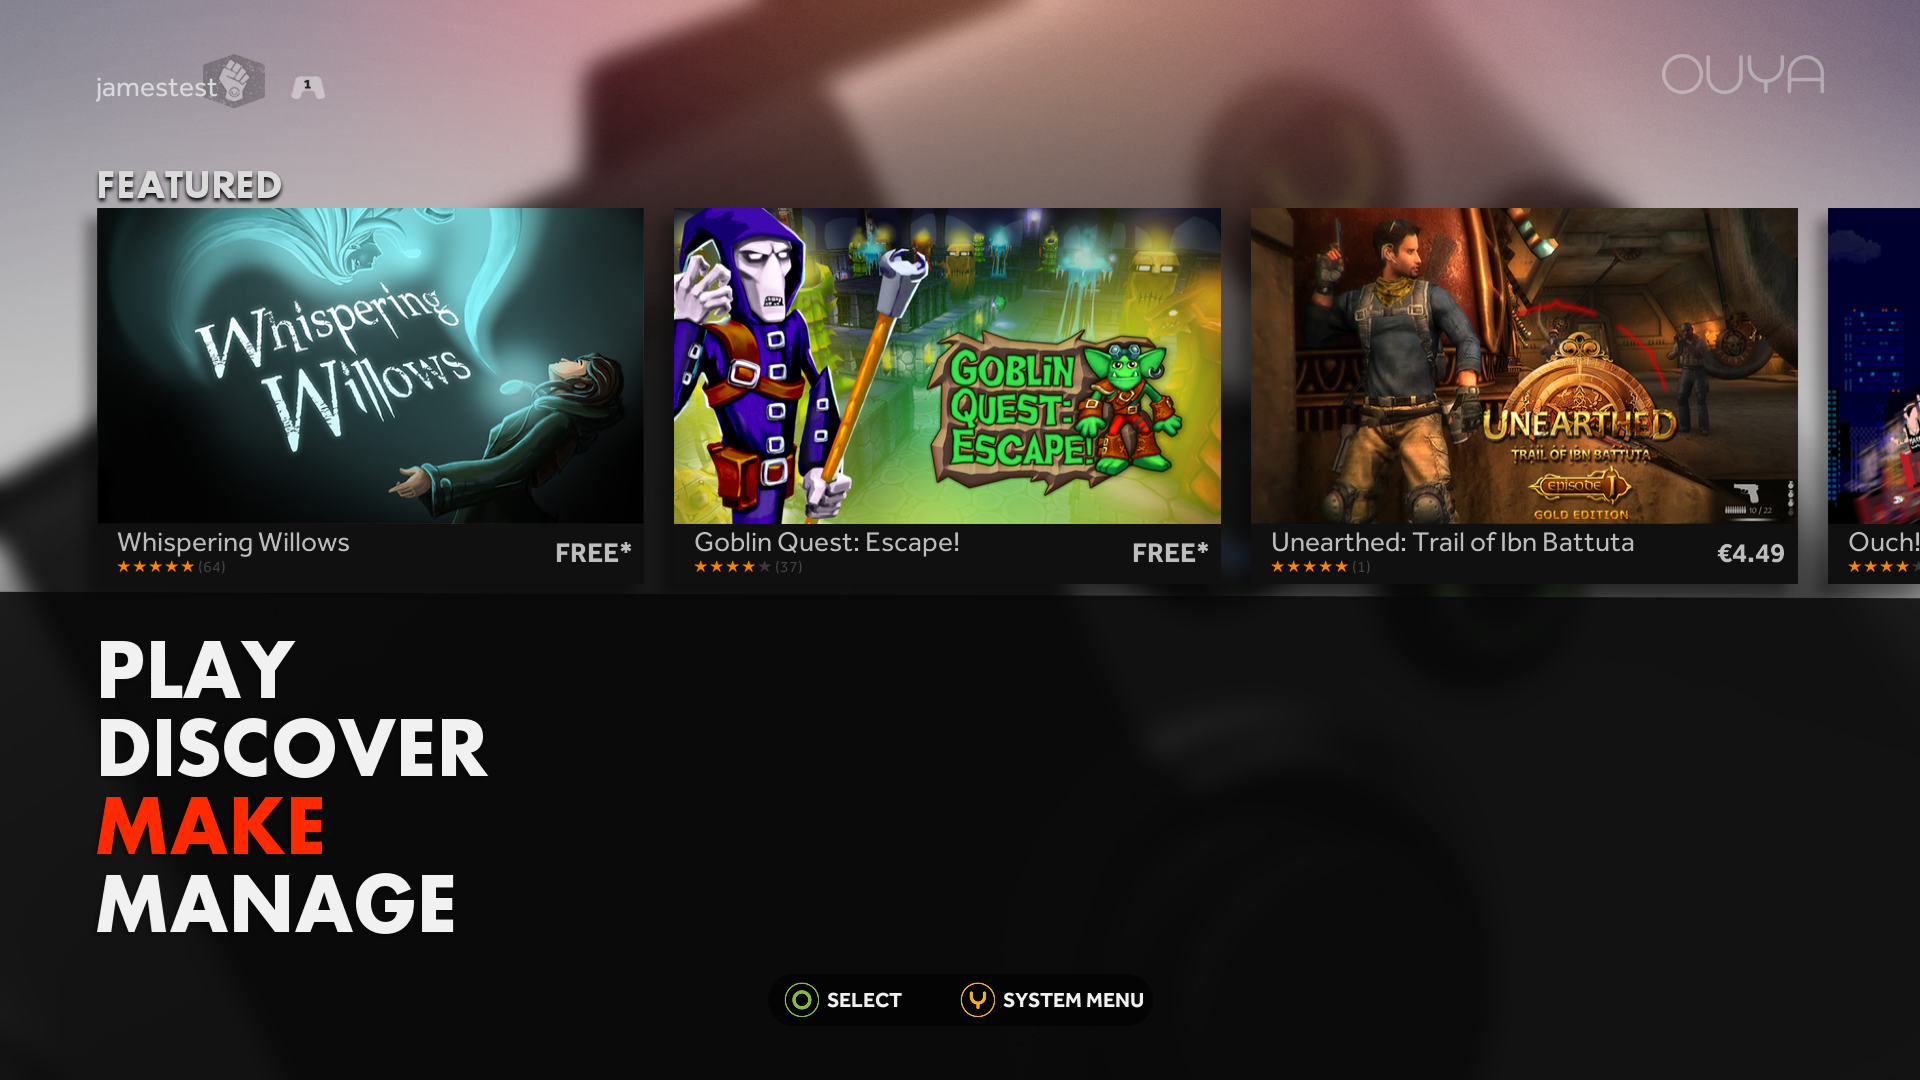 Step 1: First go to the developer section (the Make tab) in Ouya, select Yes or "okay" to enter the developer section.